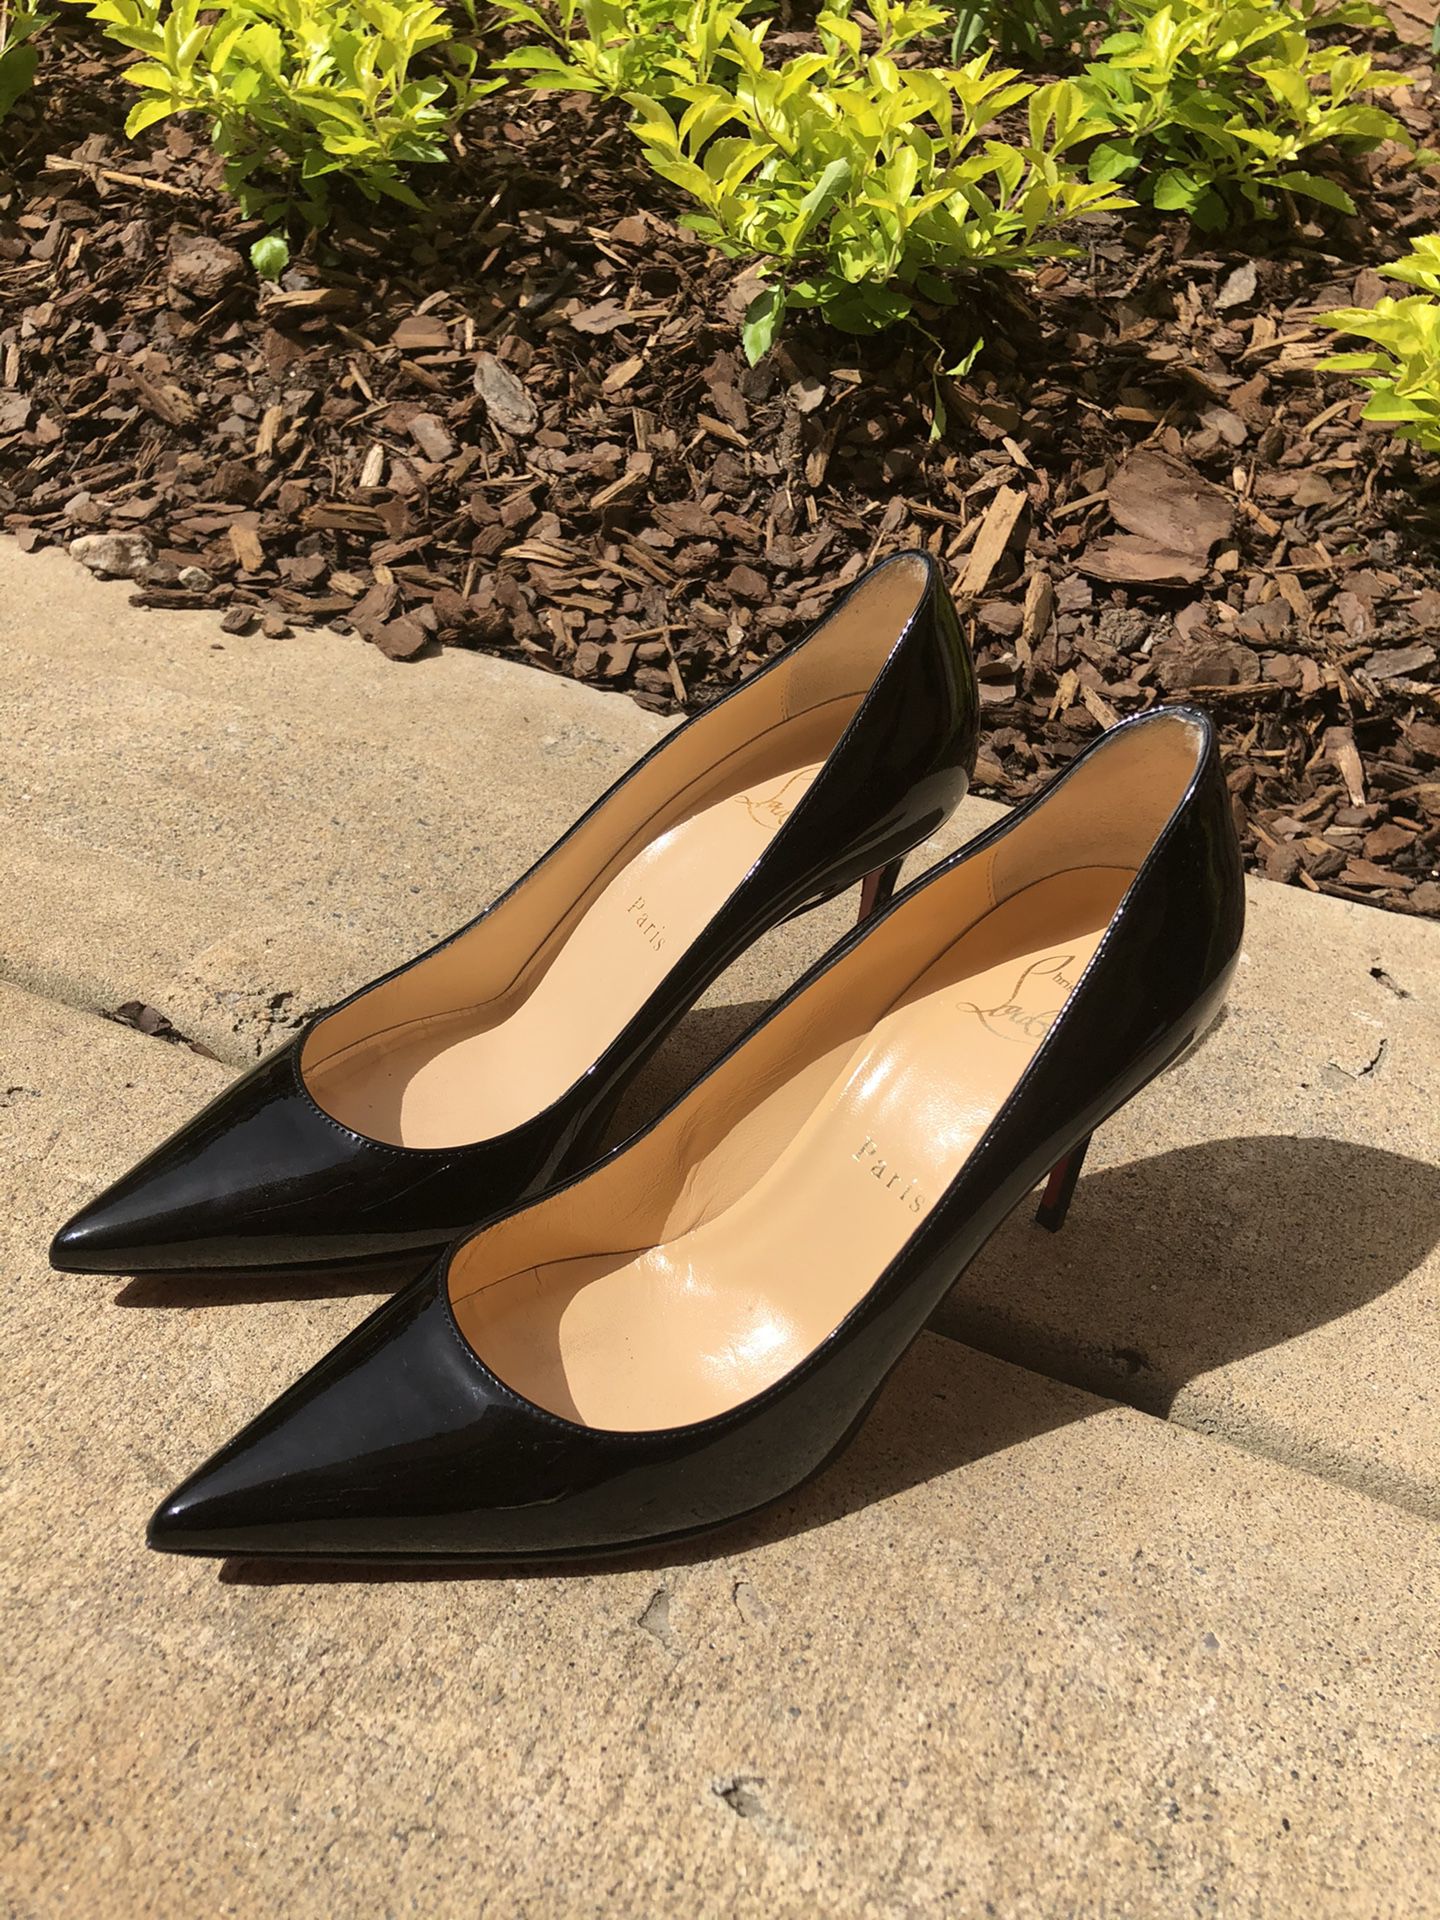 Womens Christian Louboutin New So Kate Size 36 Black Patent Leather Heels 6. Condition is